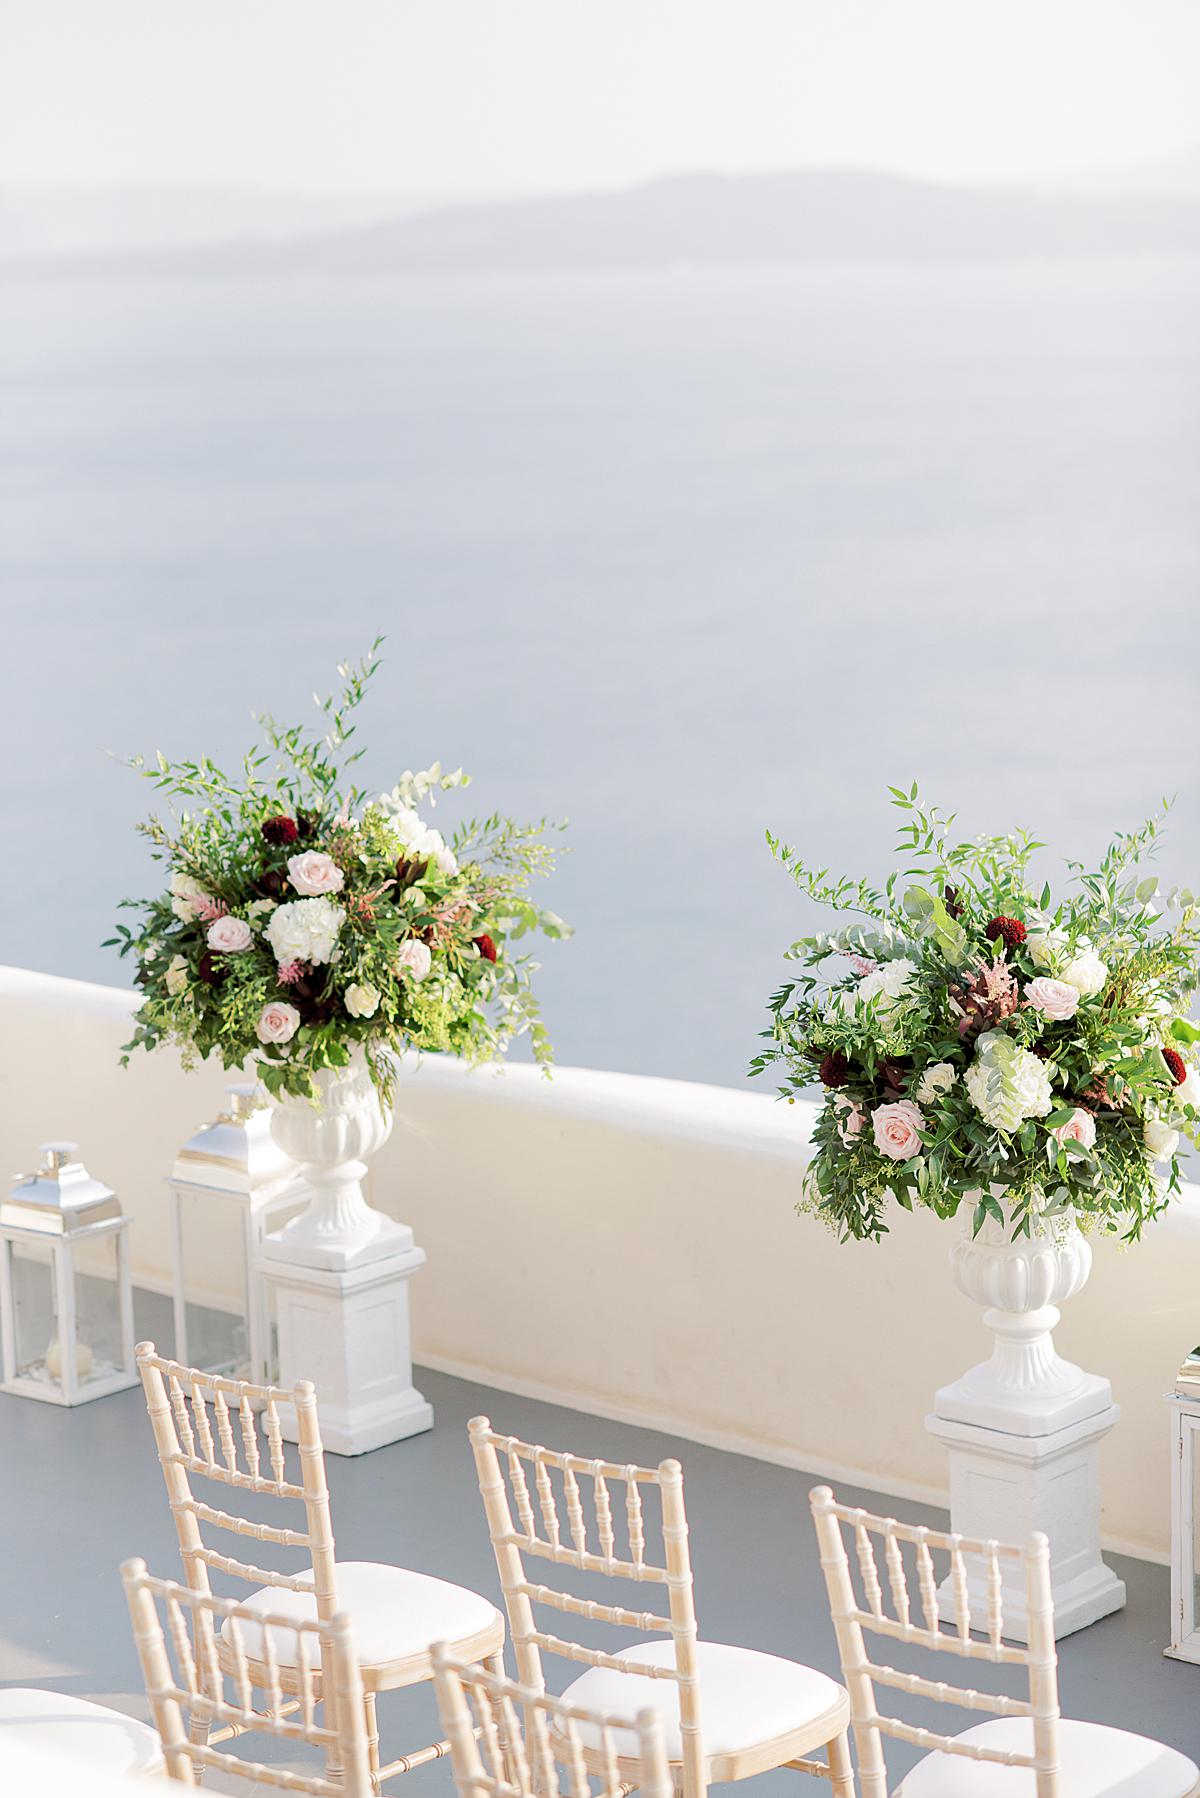 wedding ceremony set up at canaves oia santorini